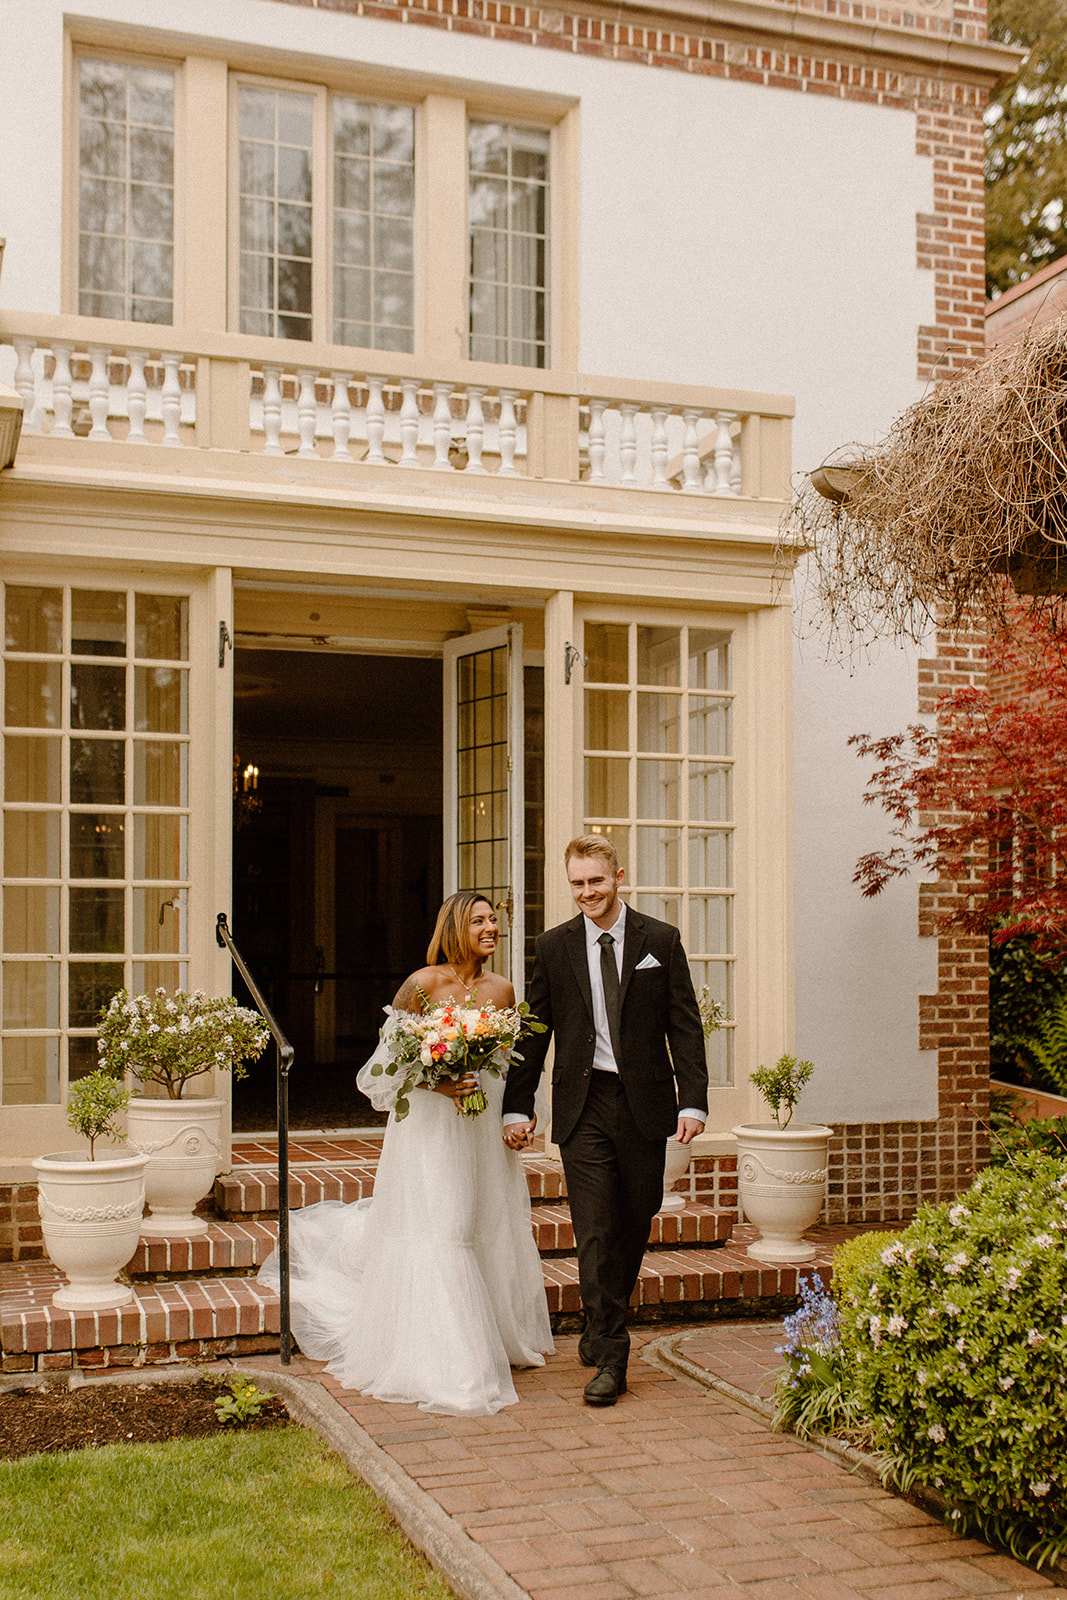 A Dreamy Wedding Day at Lairmont Manor